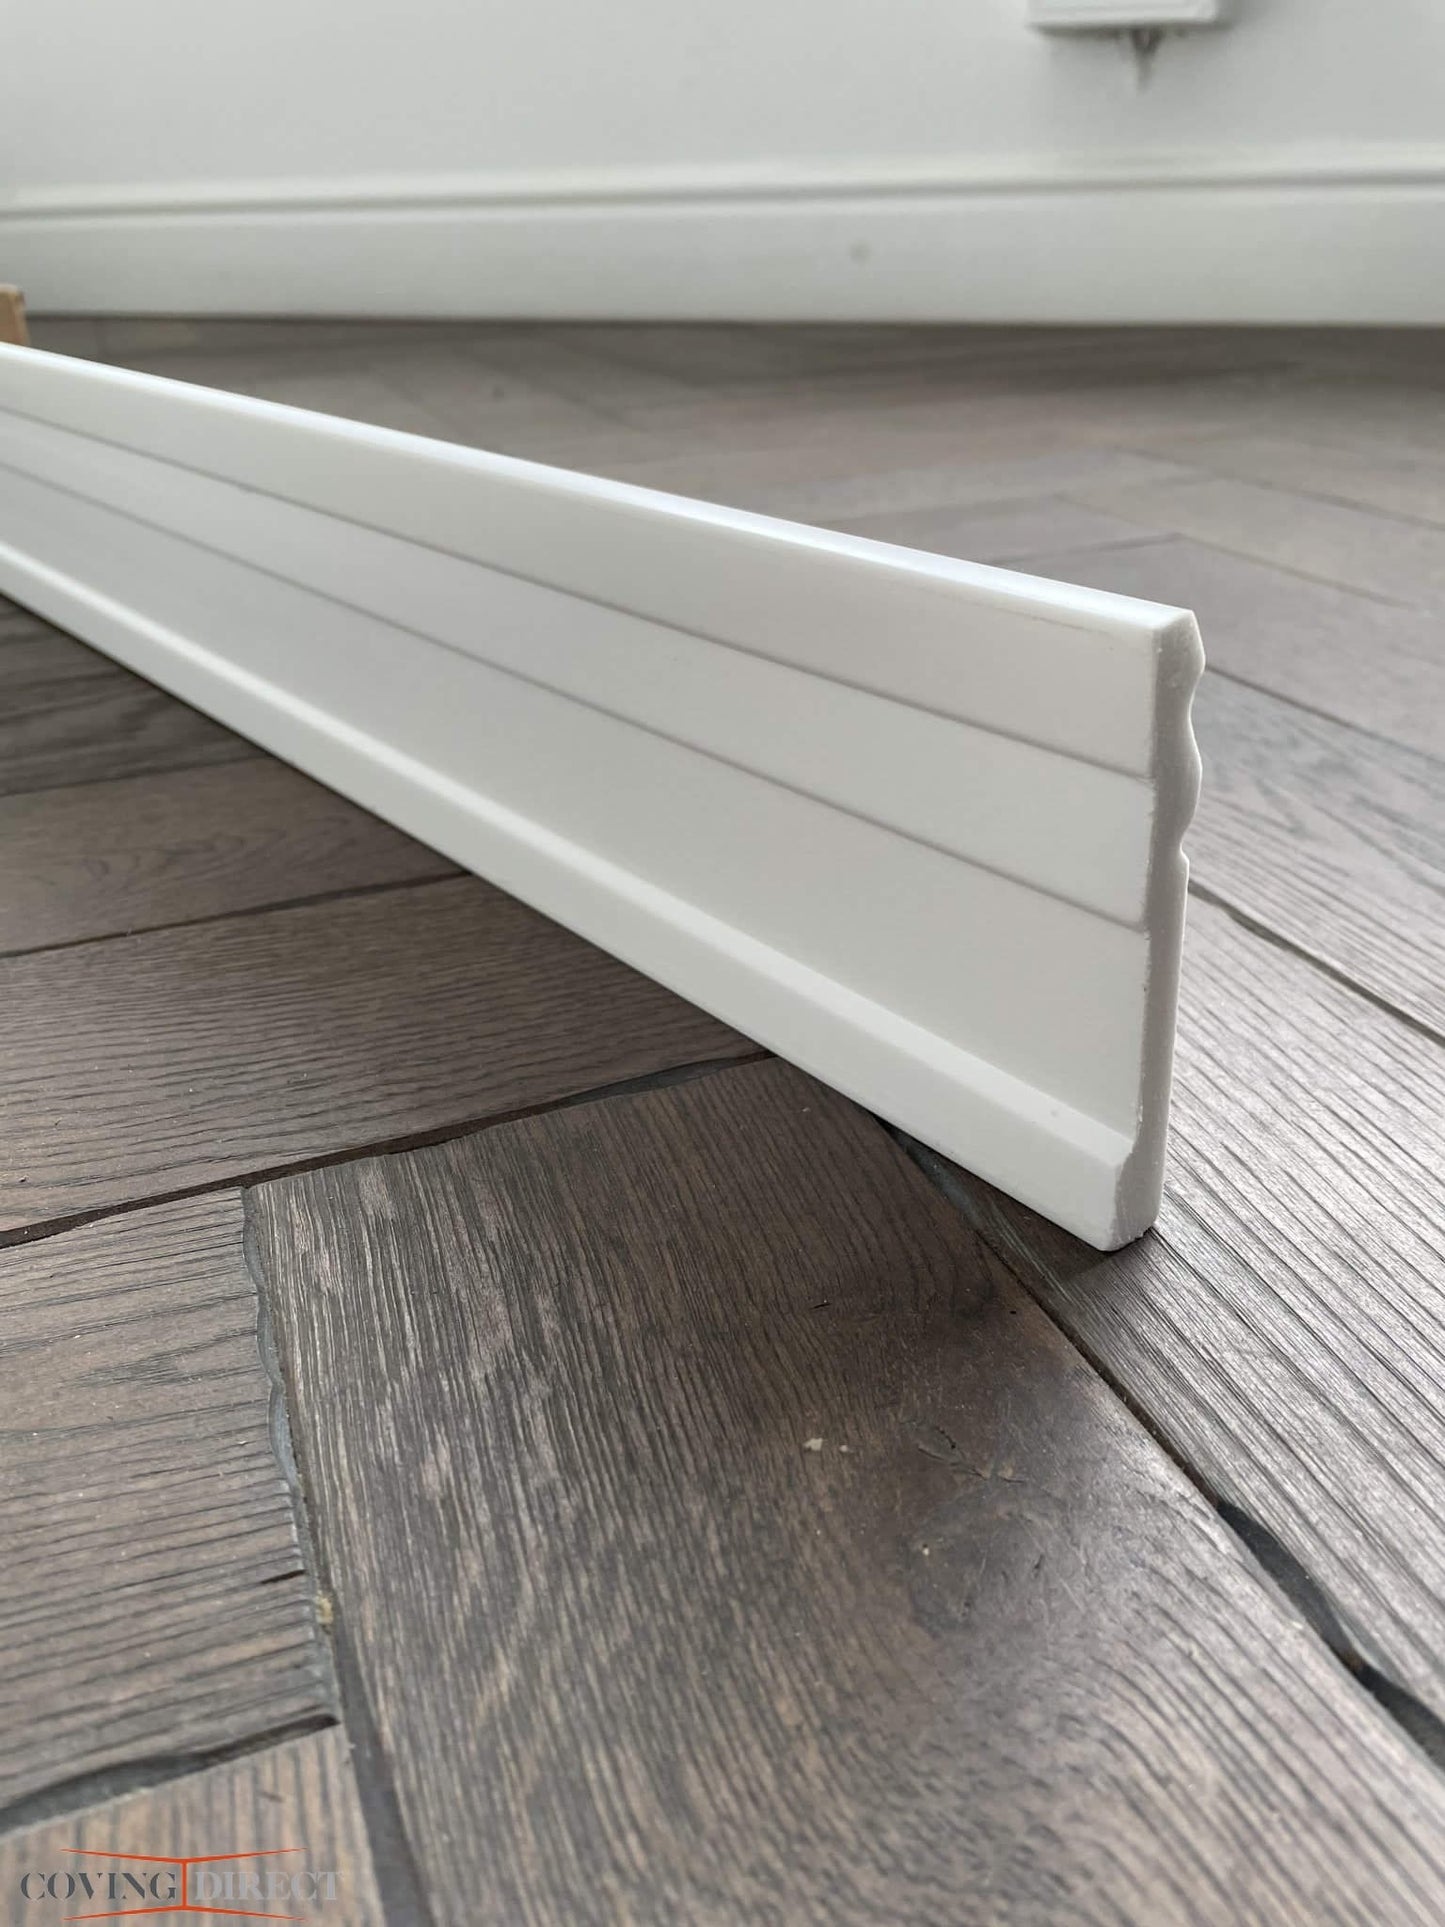 MD094P - Skirting Board on a floor